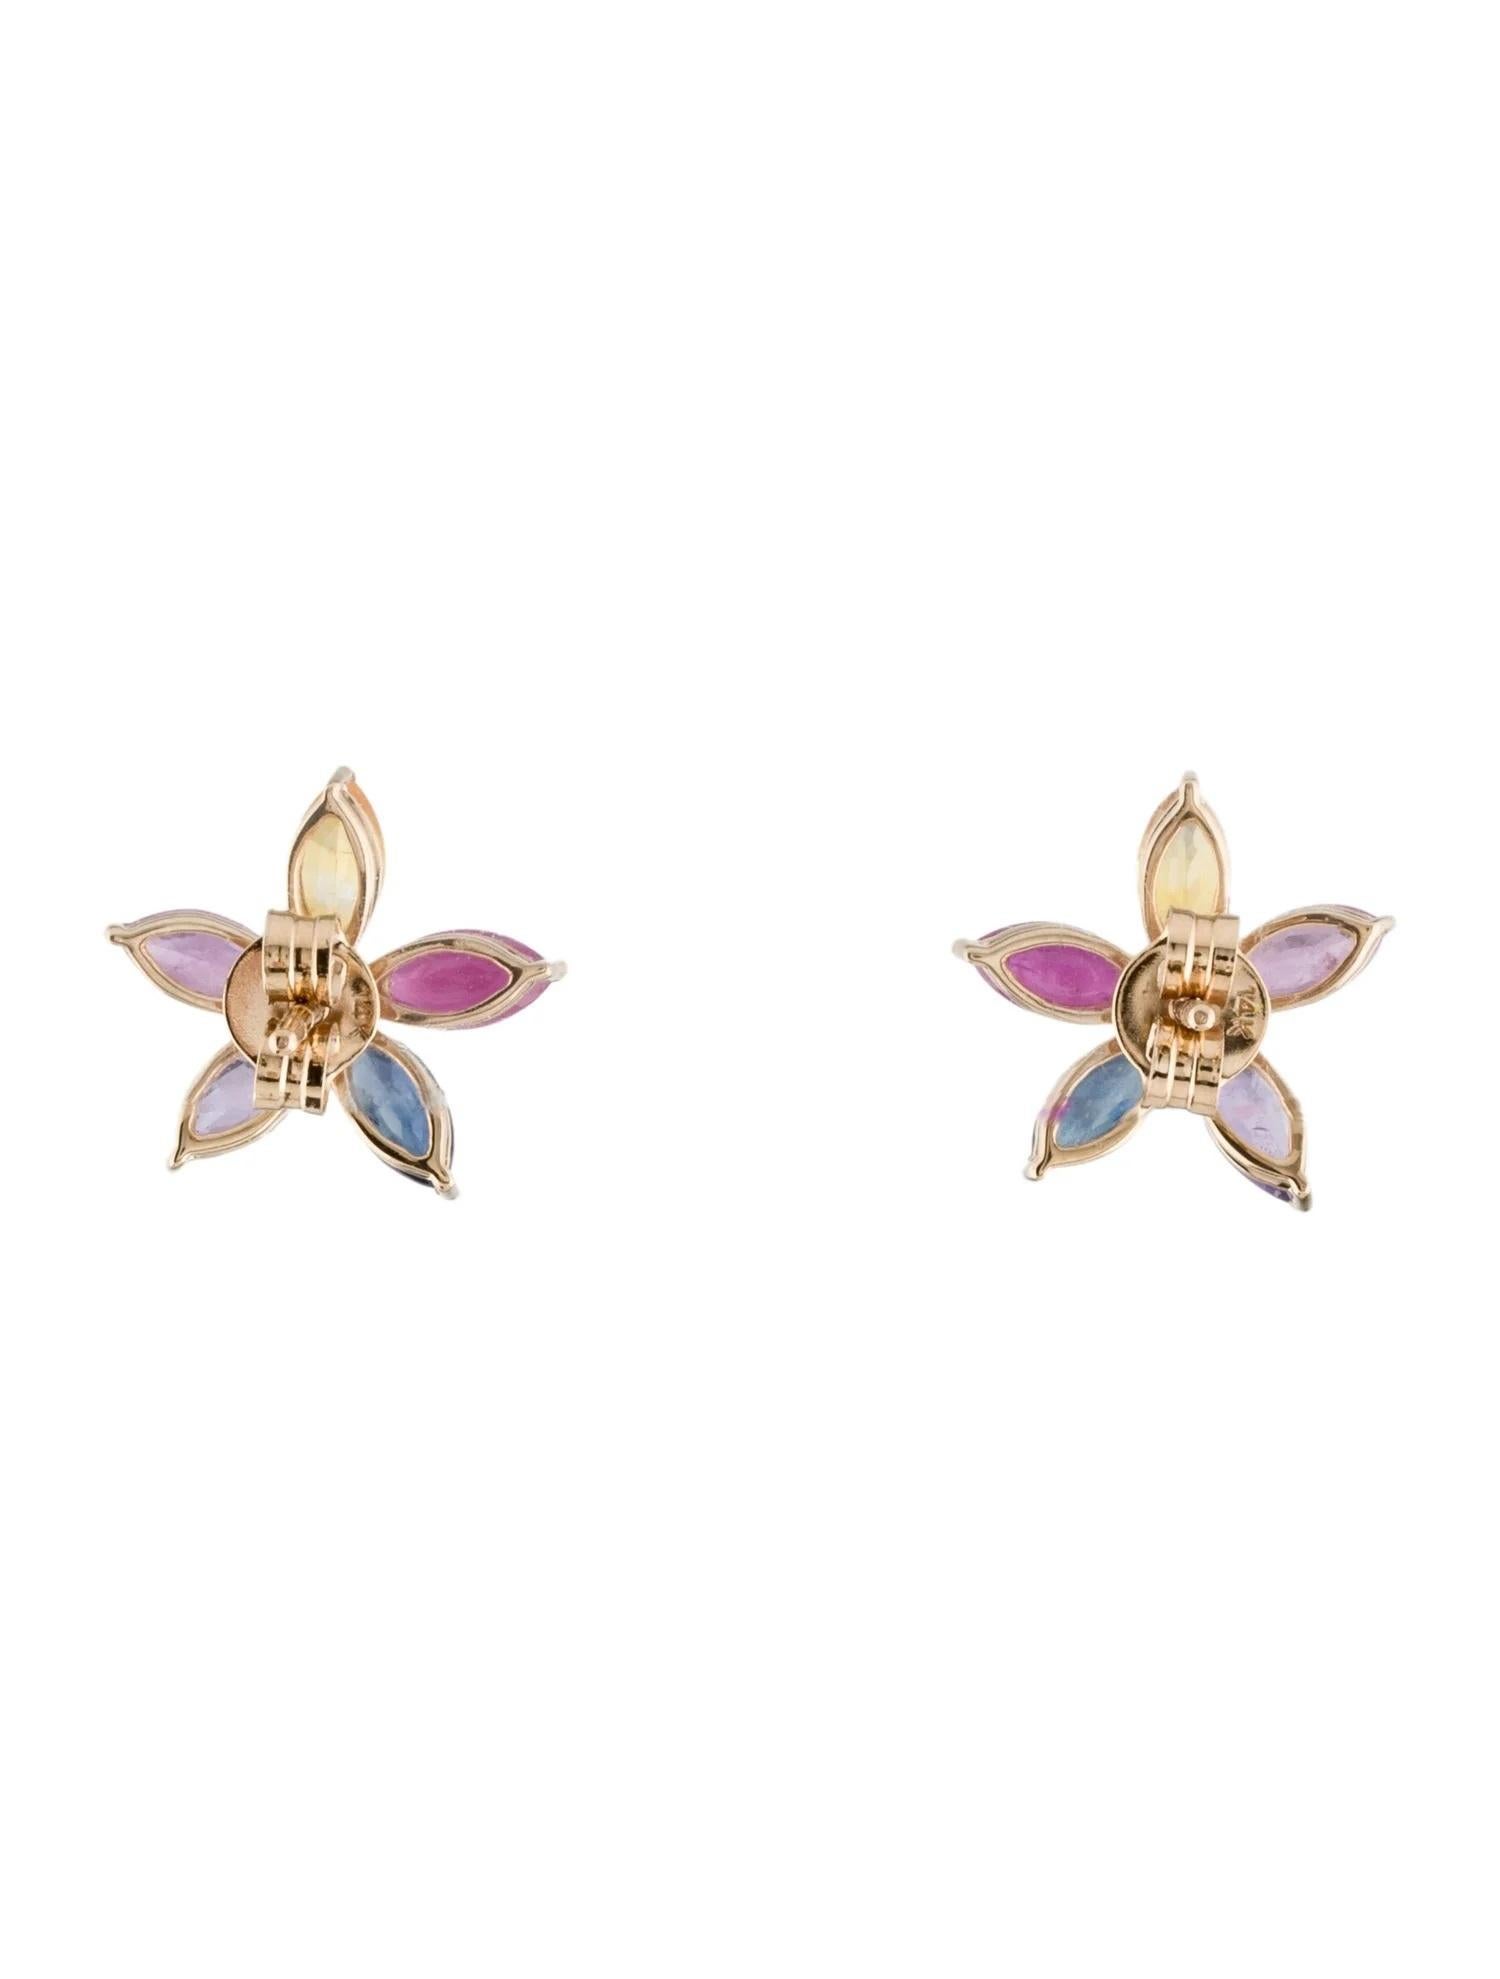 Artist Radiant 14K Yellow Gold Earrings with Multi-Colored Sapphire and Diamonds For Sale